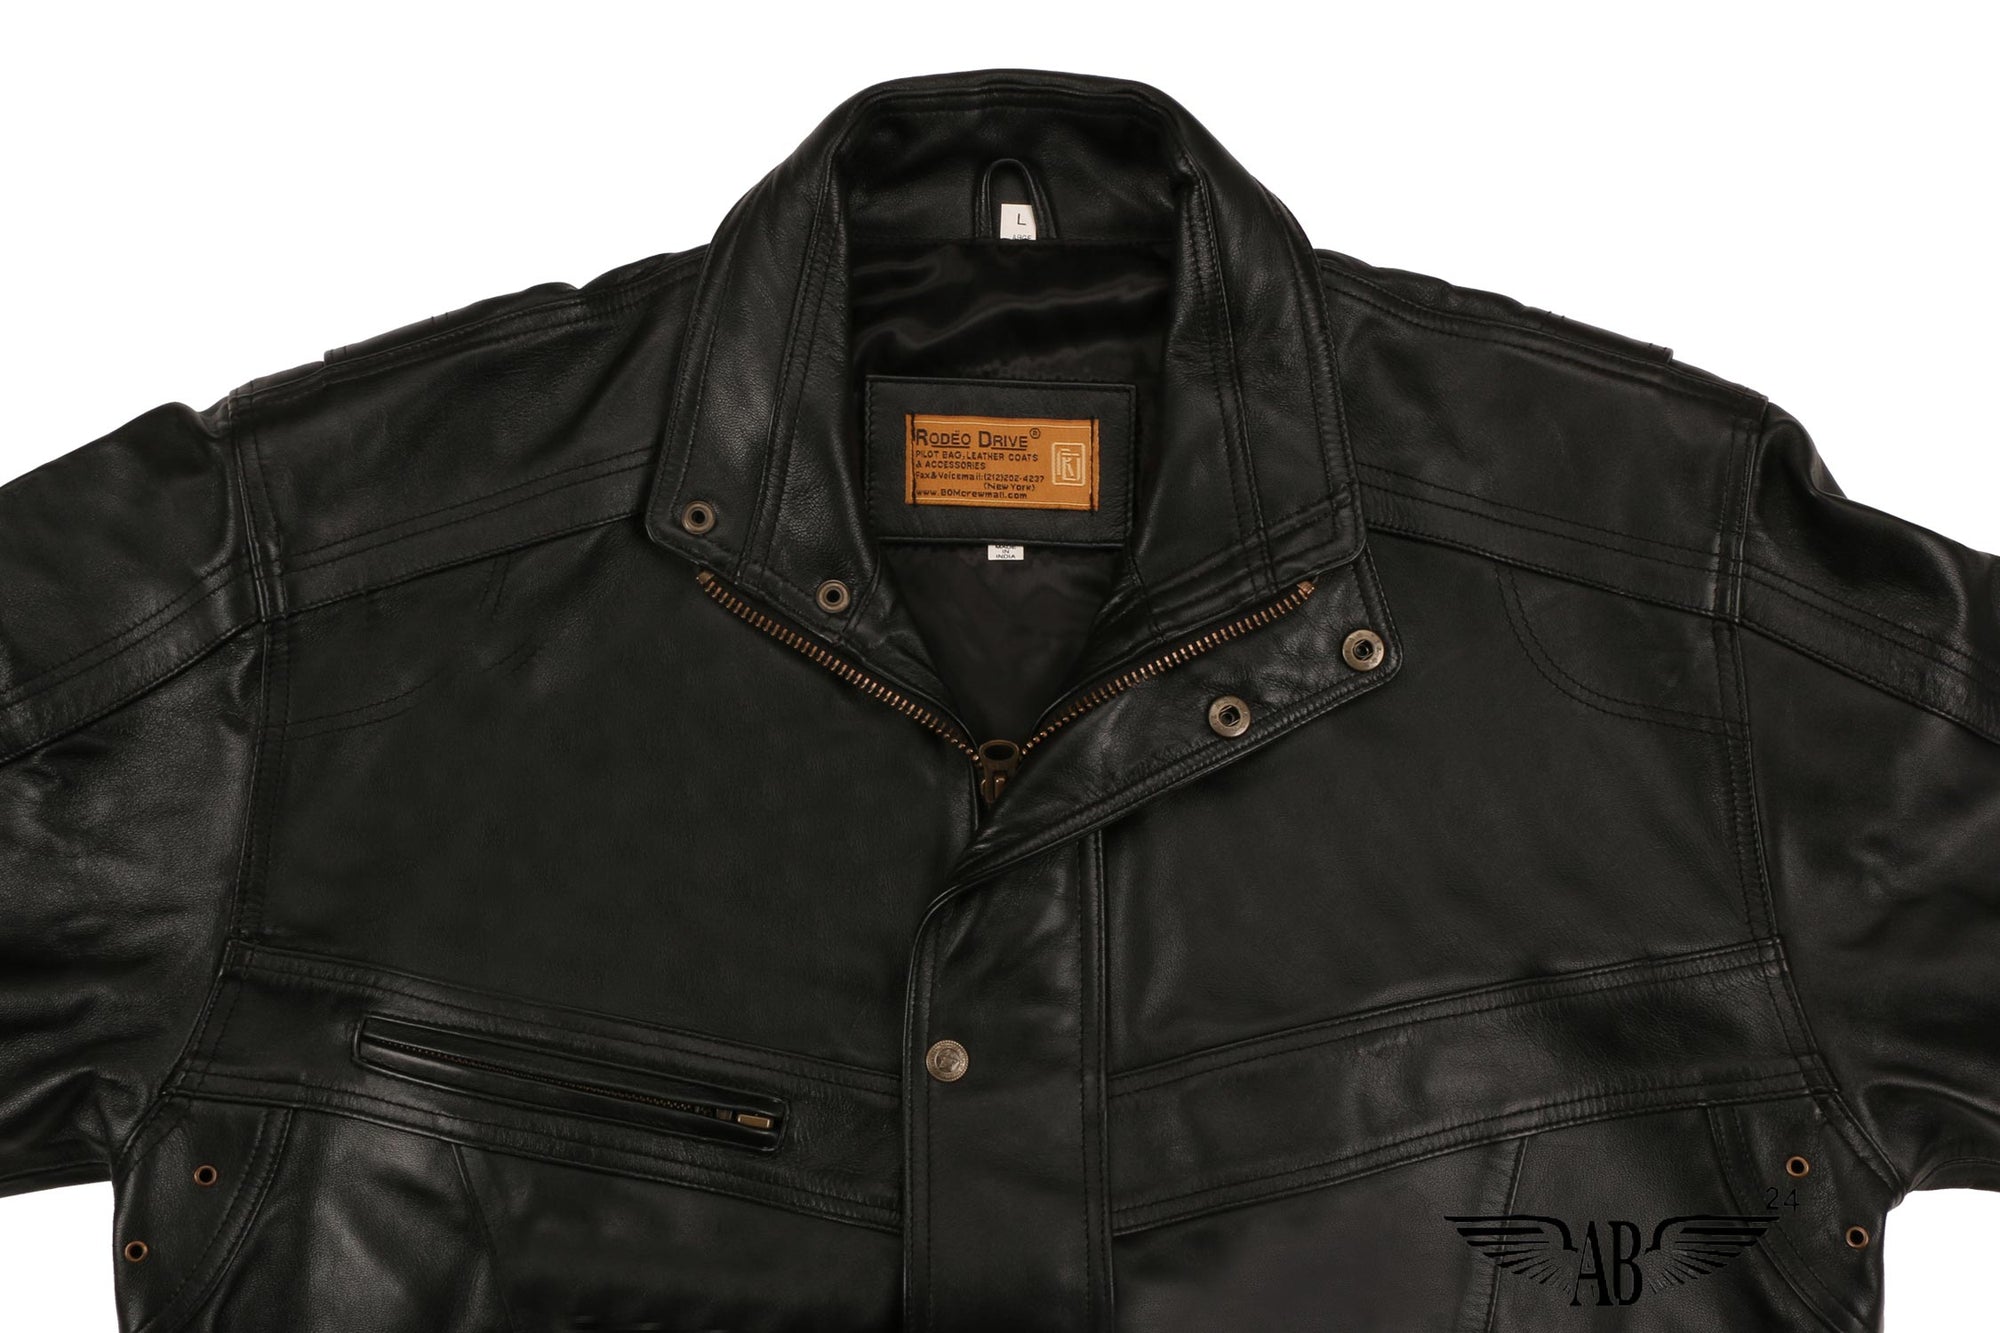 Front view of  bomber jacket.  Right side pocket is visible. The jacket has zipper pattern to open and shut. Even buttons are available. Side pocket is zipped.